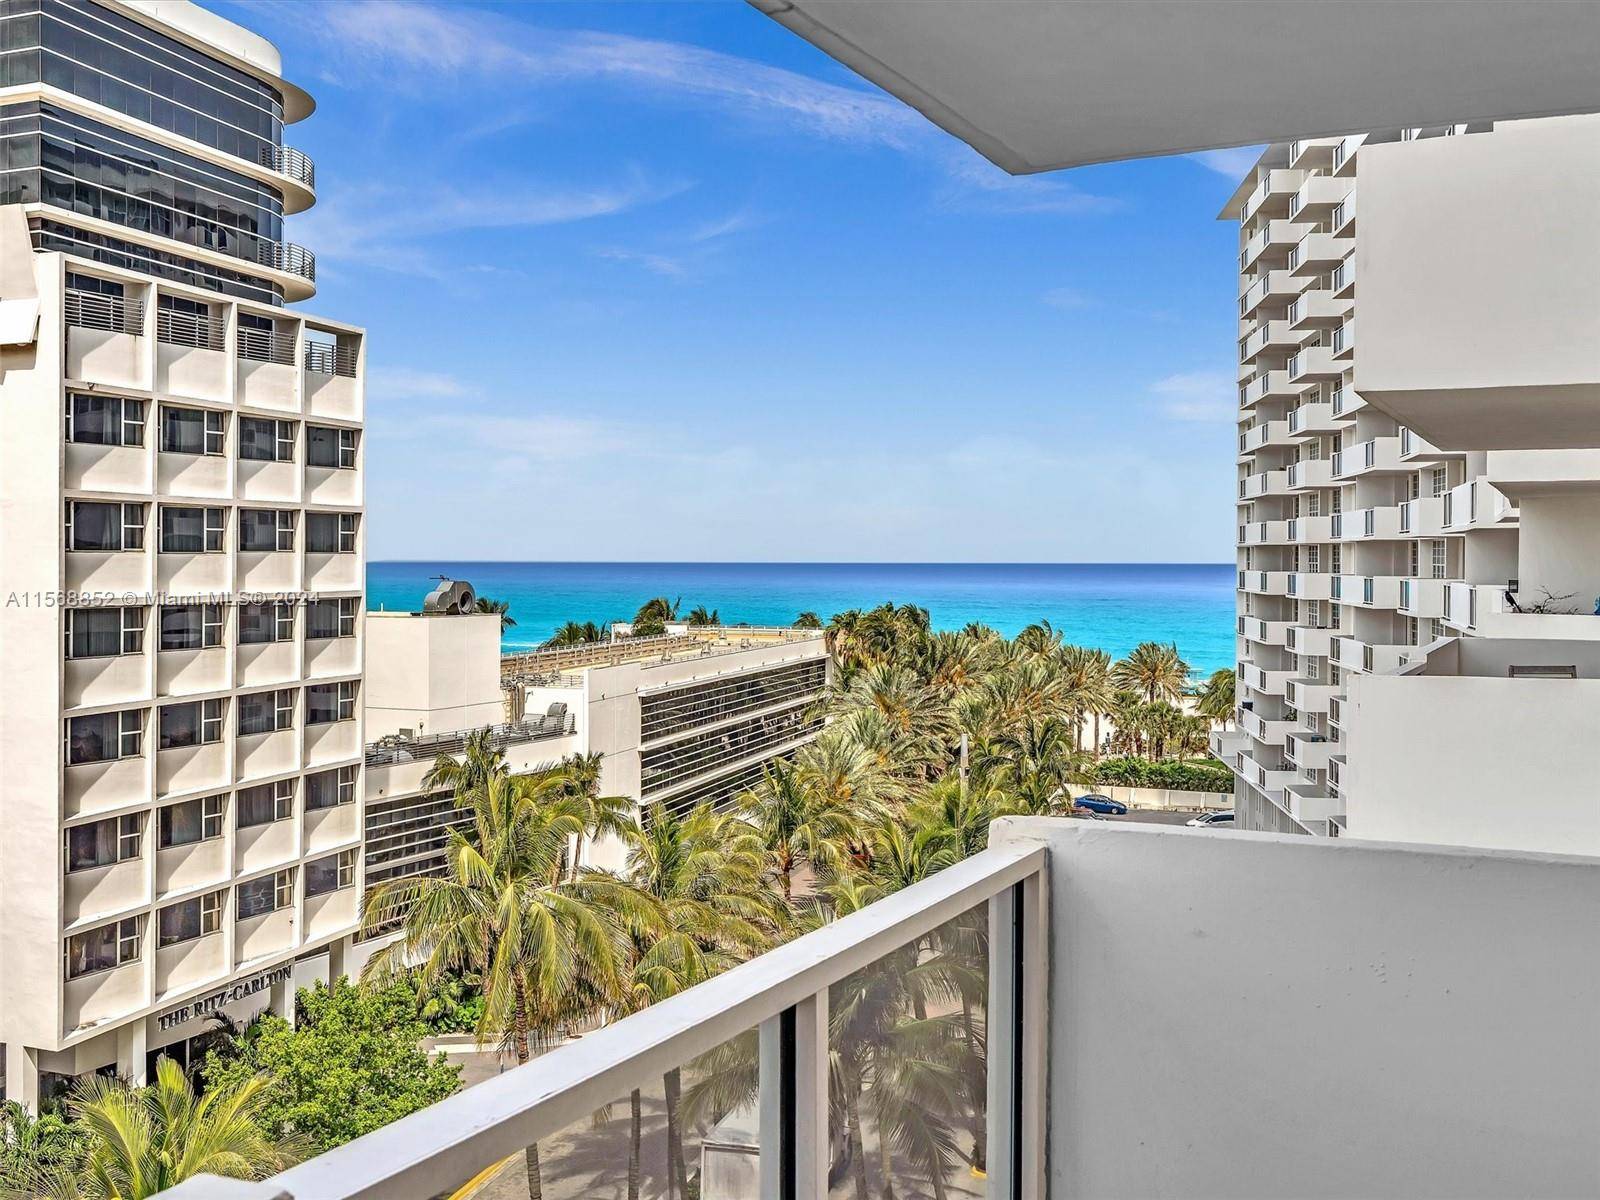 Welcome to this stunning Oceanfront one bedroom condo w direct beach access.